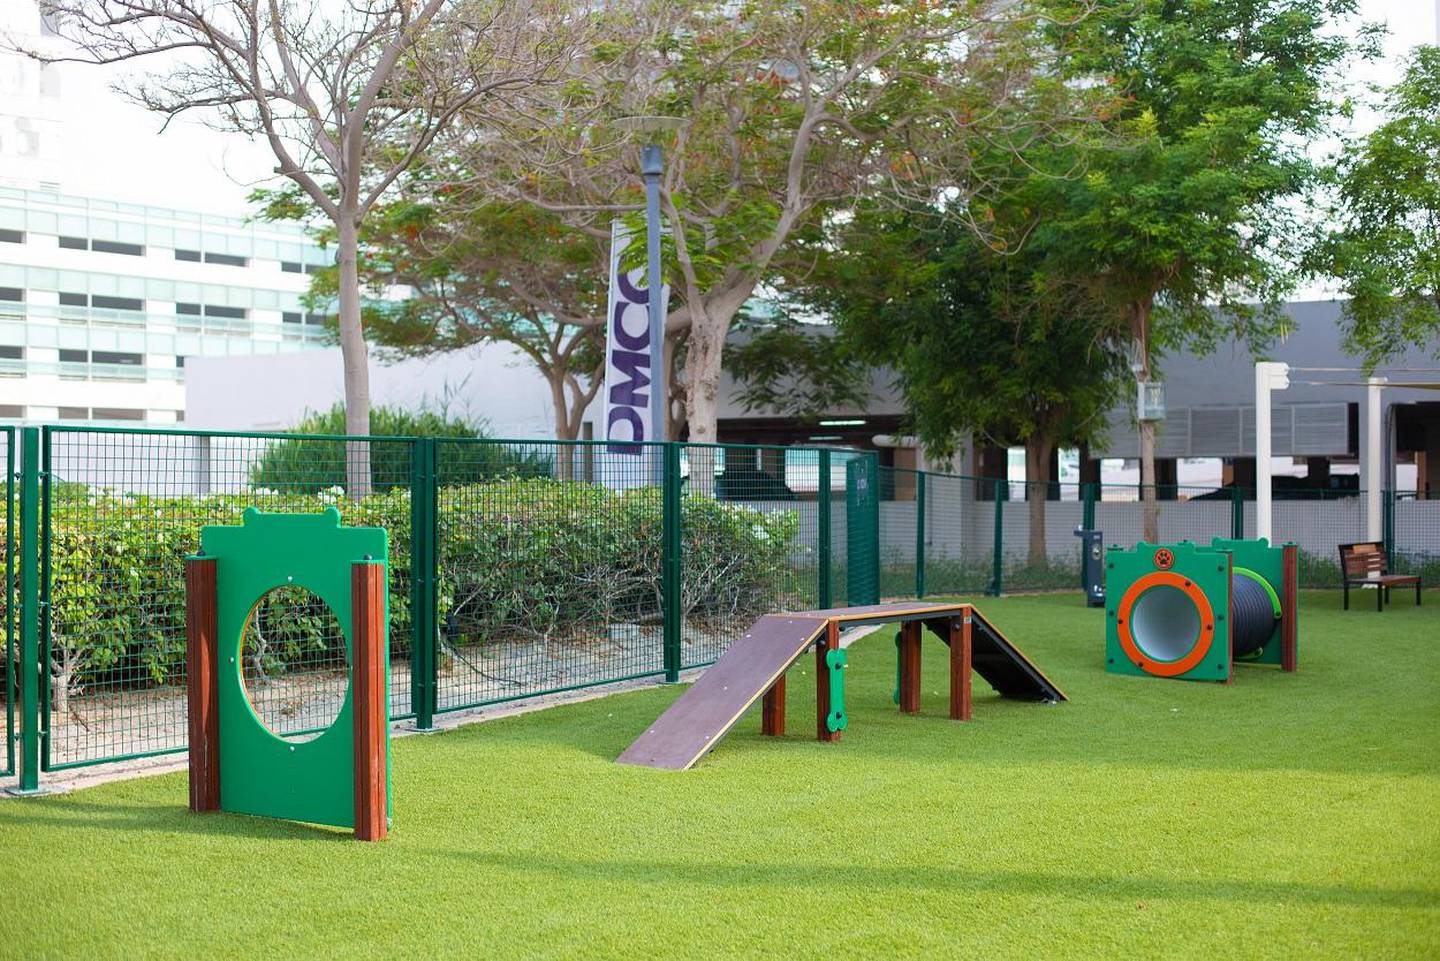 The new JLT Dog Park is located near Cluster H. Courtesy DMCC